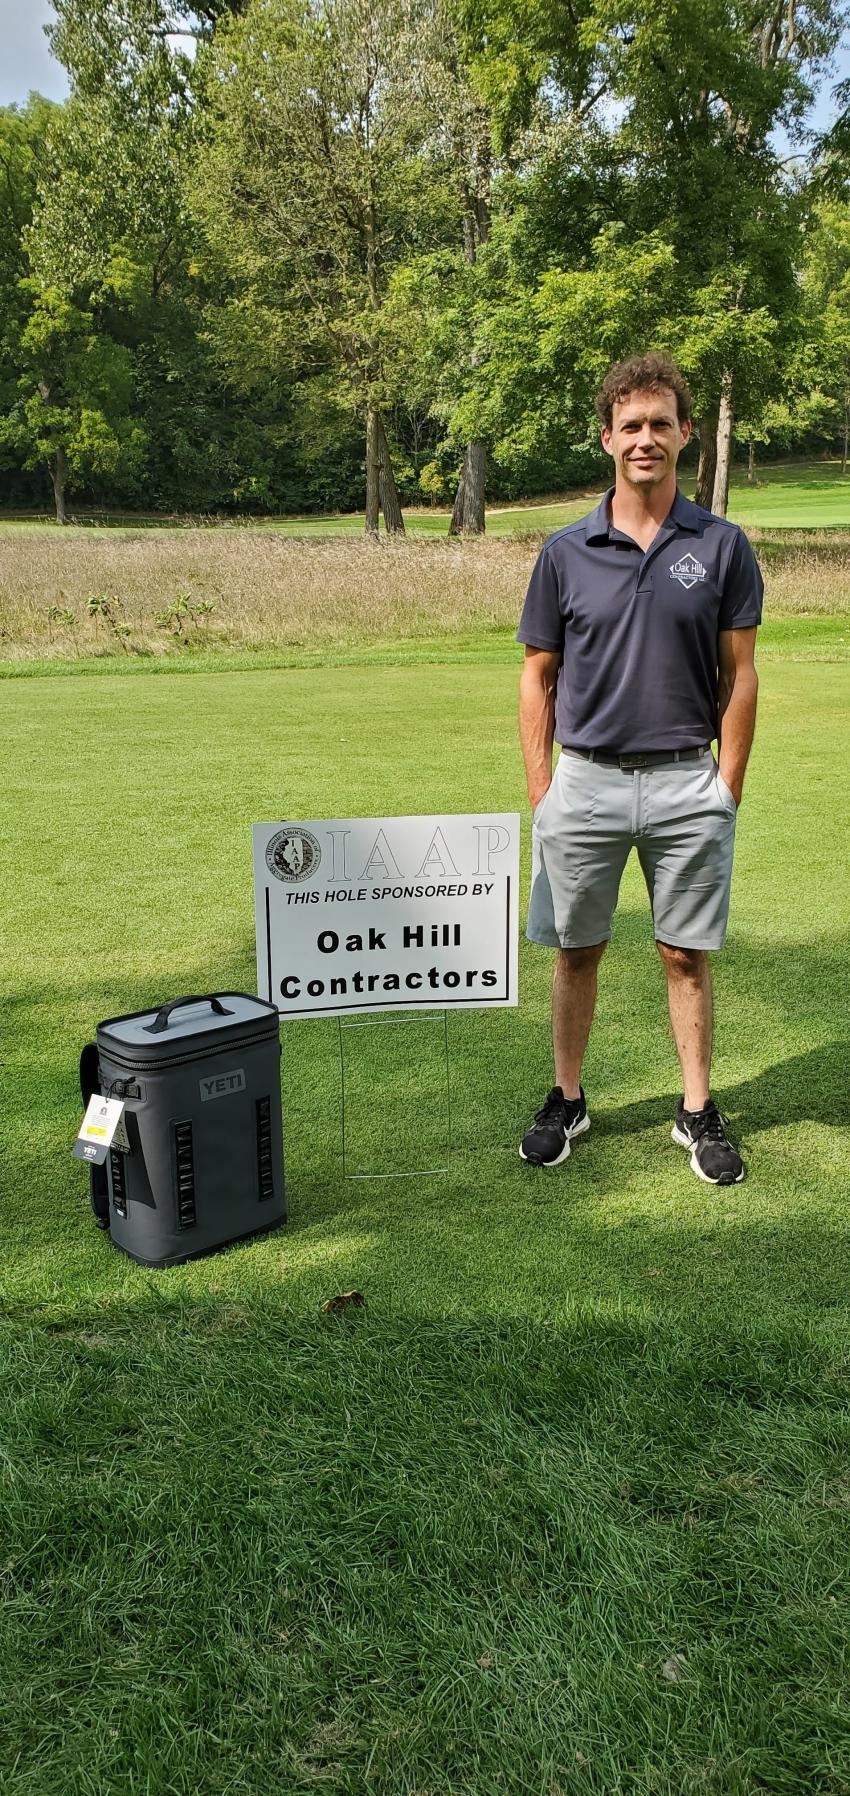 Oak Hill Contractors hosted a longest drive contest on hole #13 with a Yeti cooler going to the winner and cinch bags and tumblers for each golfer. Ben Cox of Oak Hill Contractors watches over the contest.
